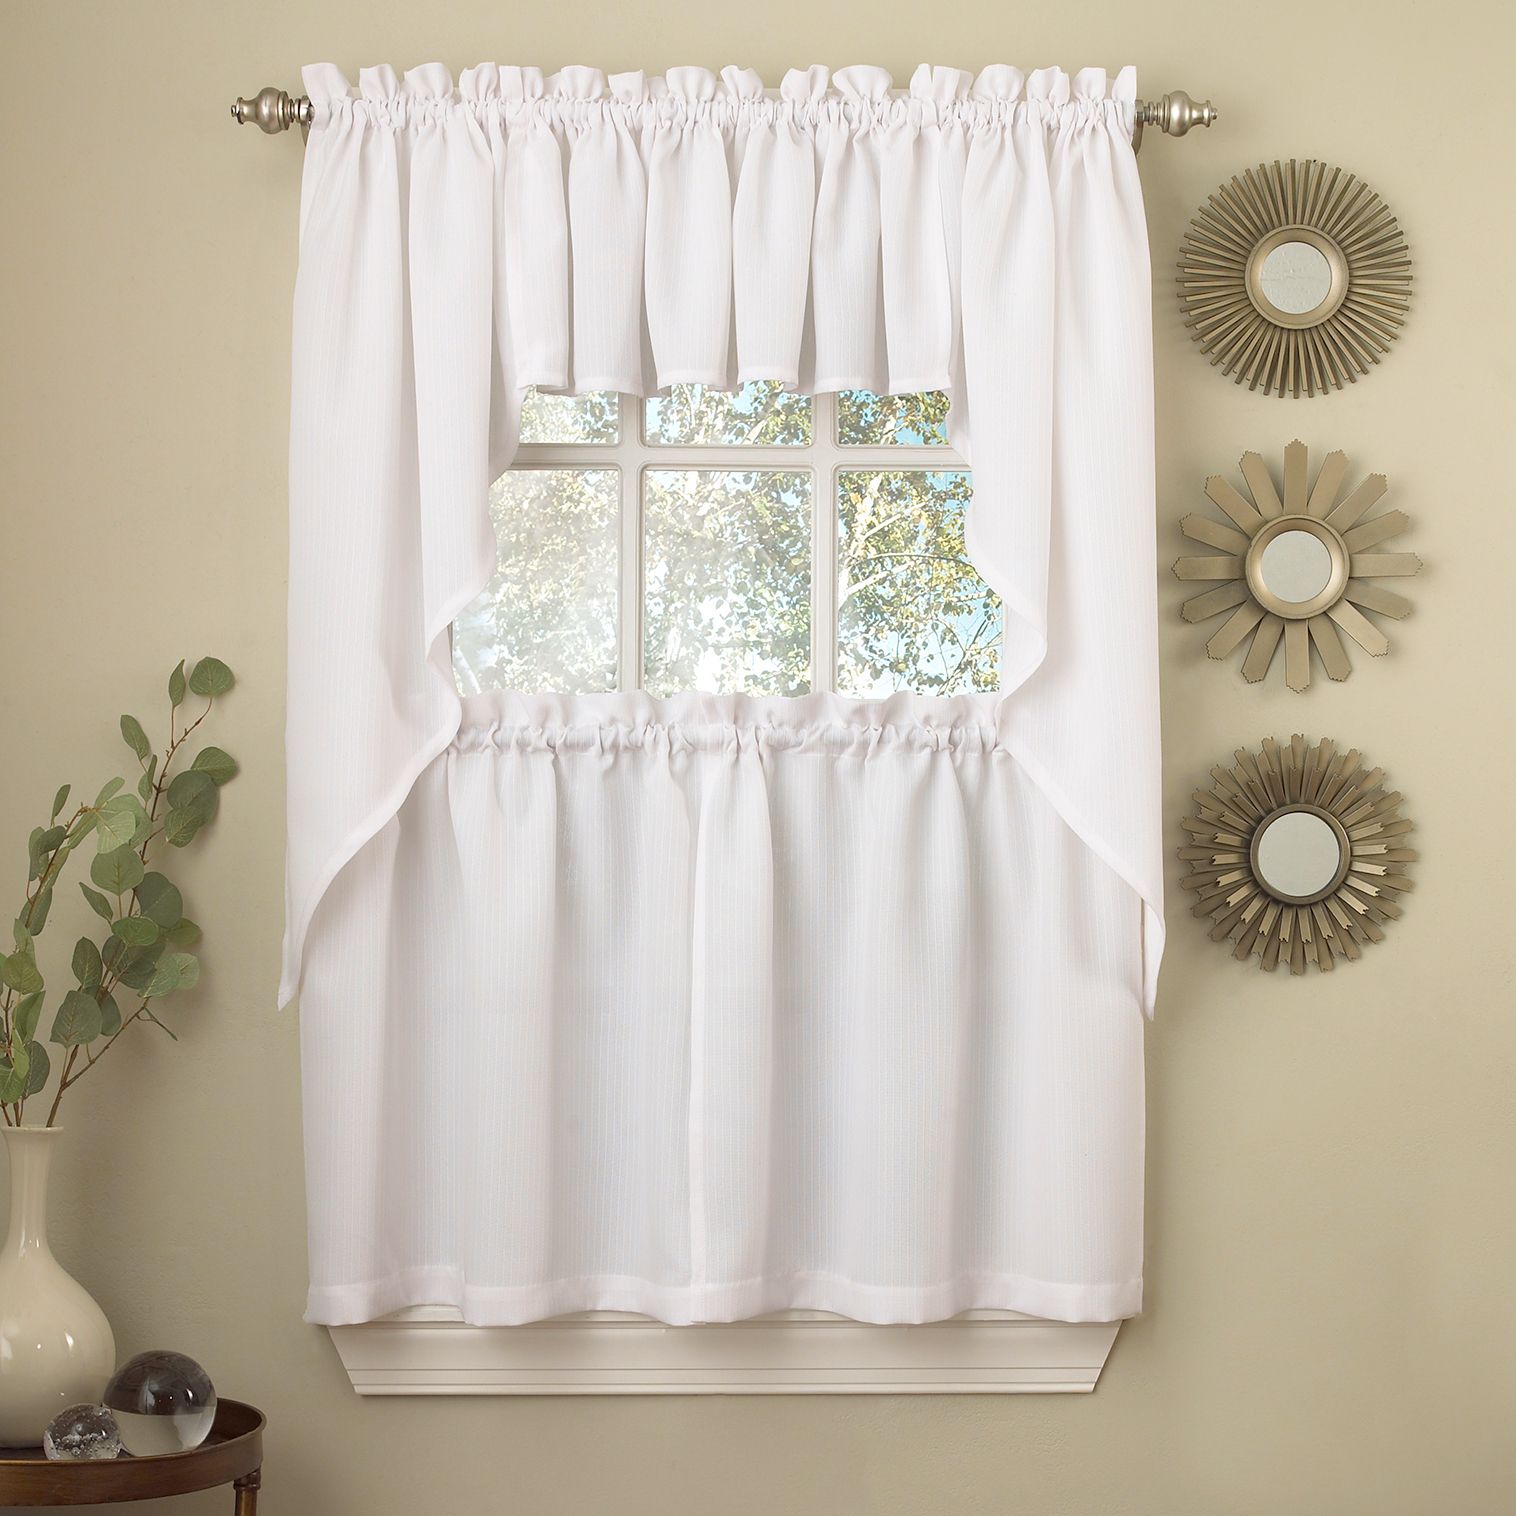 Details About White Solid Opaque Ribcord Kitchen Curtains – Choice Of Tiers  Valance Or Swag With Floral Embroidered Sheer Kitchen Curtain Tiers, Swags And Valances (View 9 of 20)